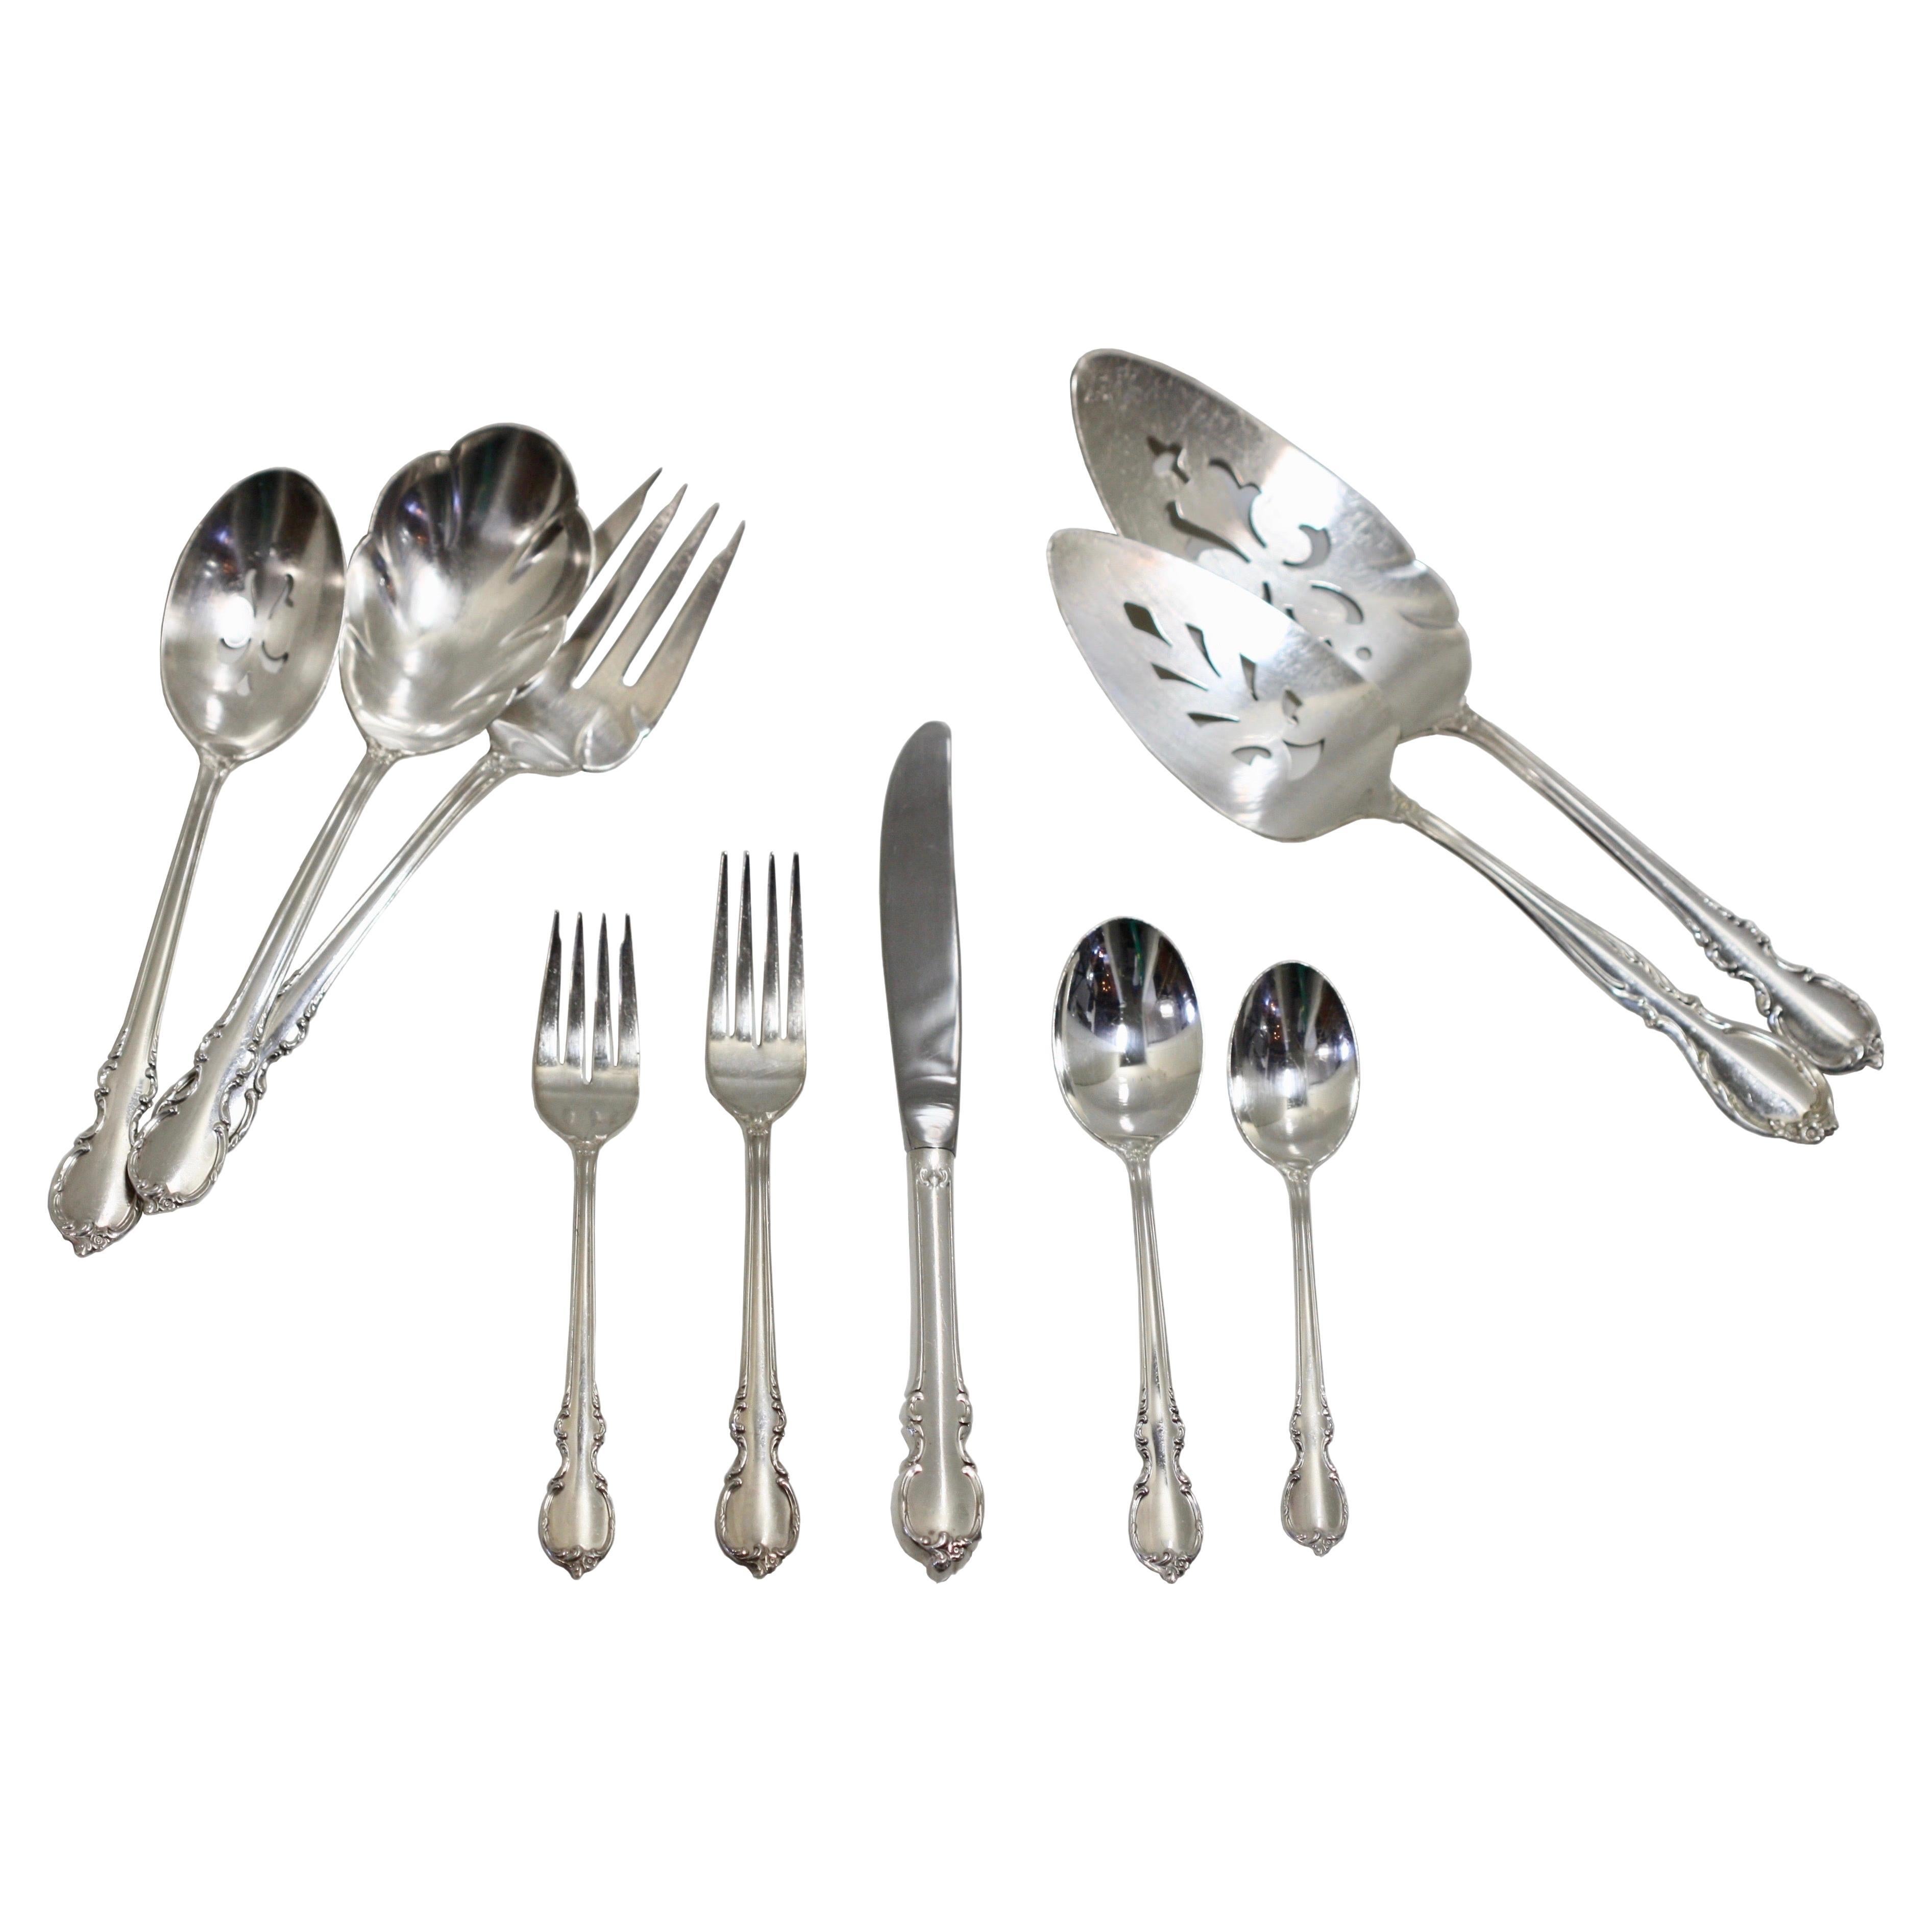  American Sterling Silver Sixty-Six Piece Part Flatware Service 